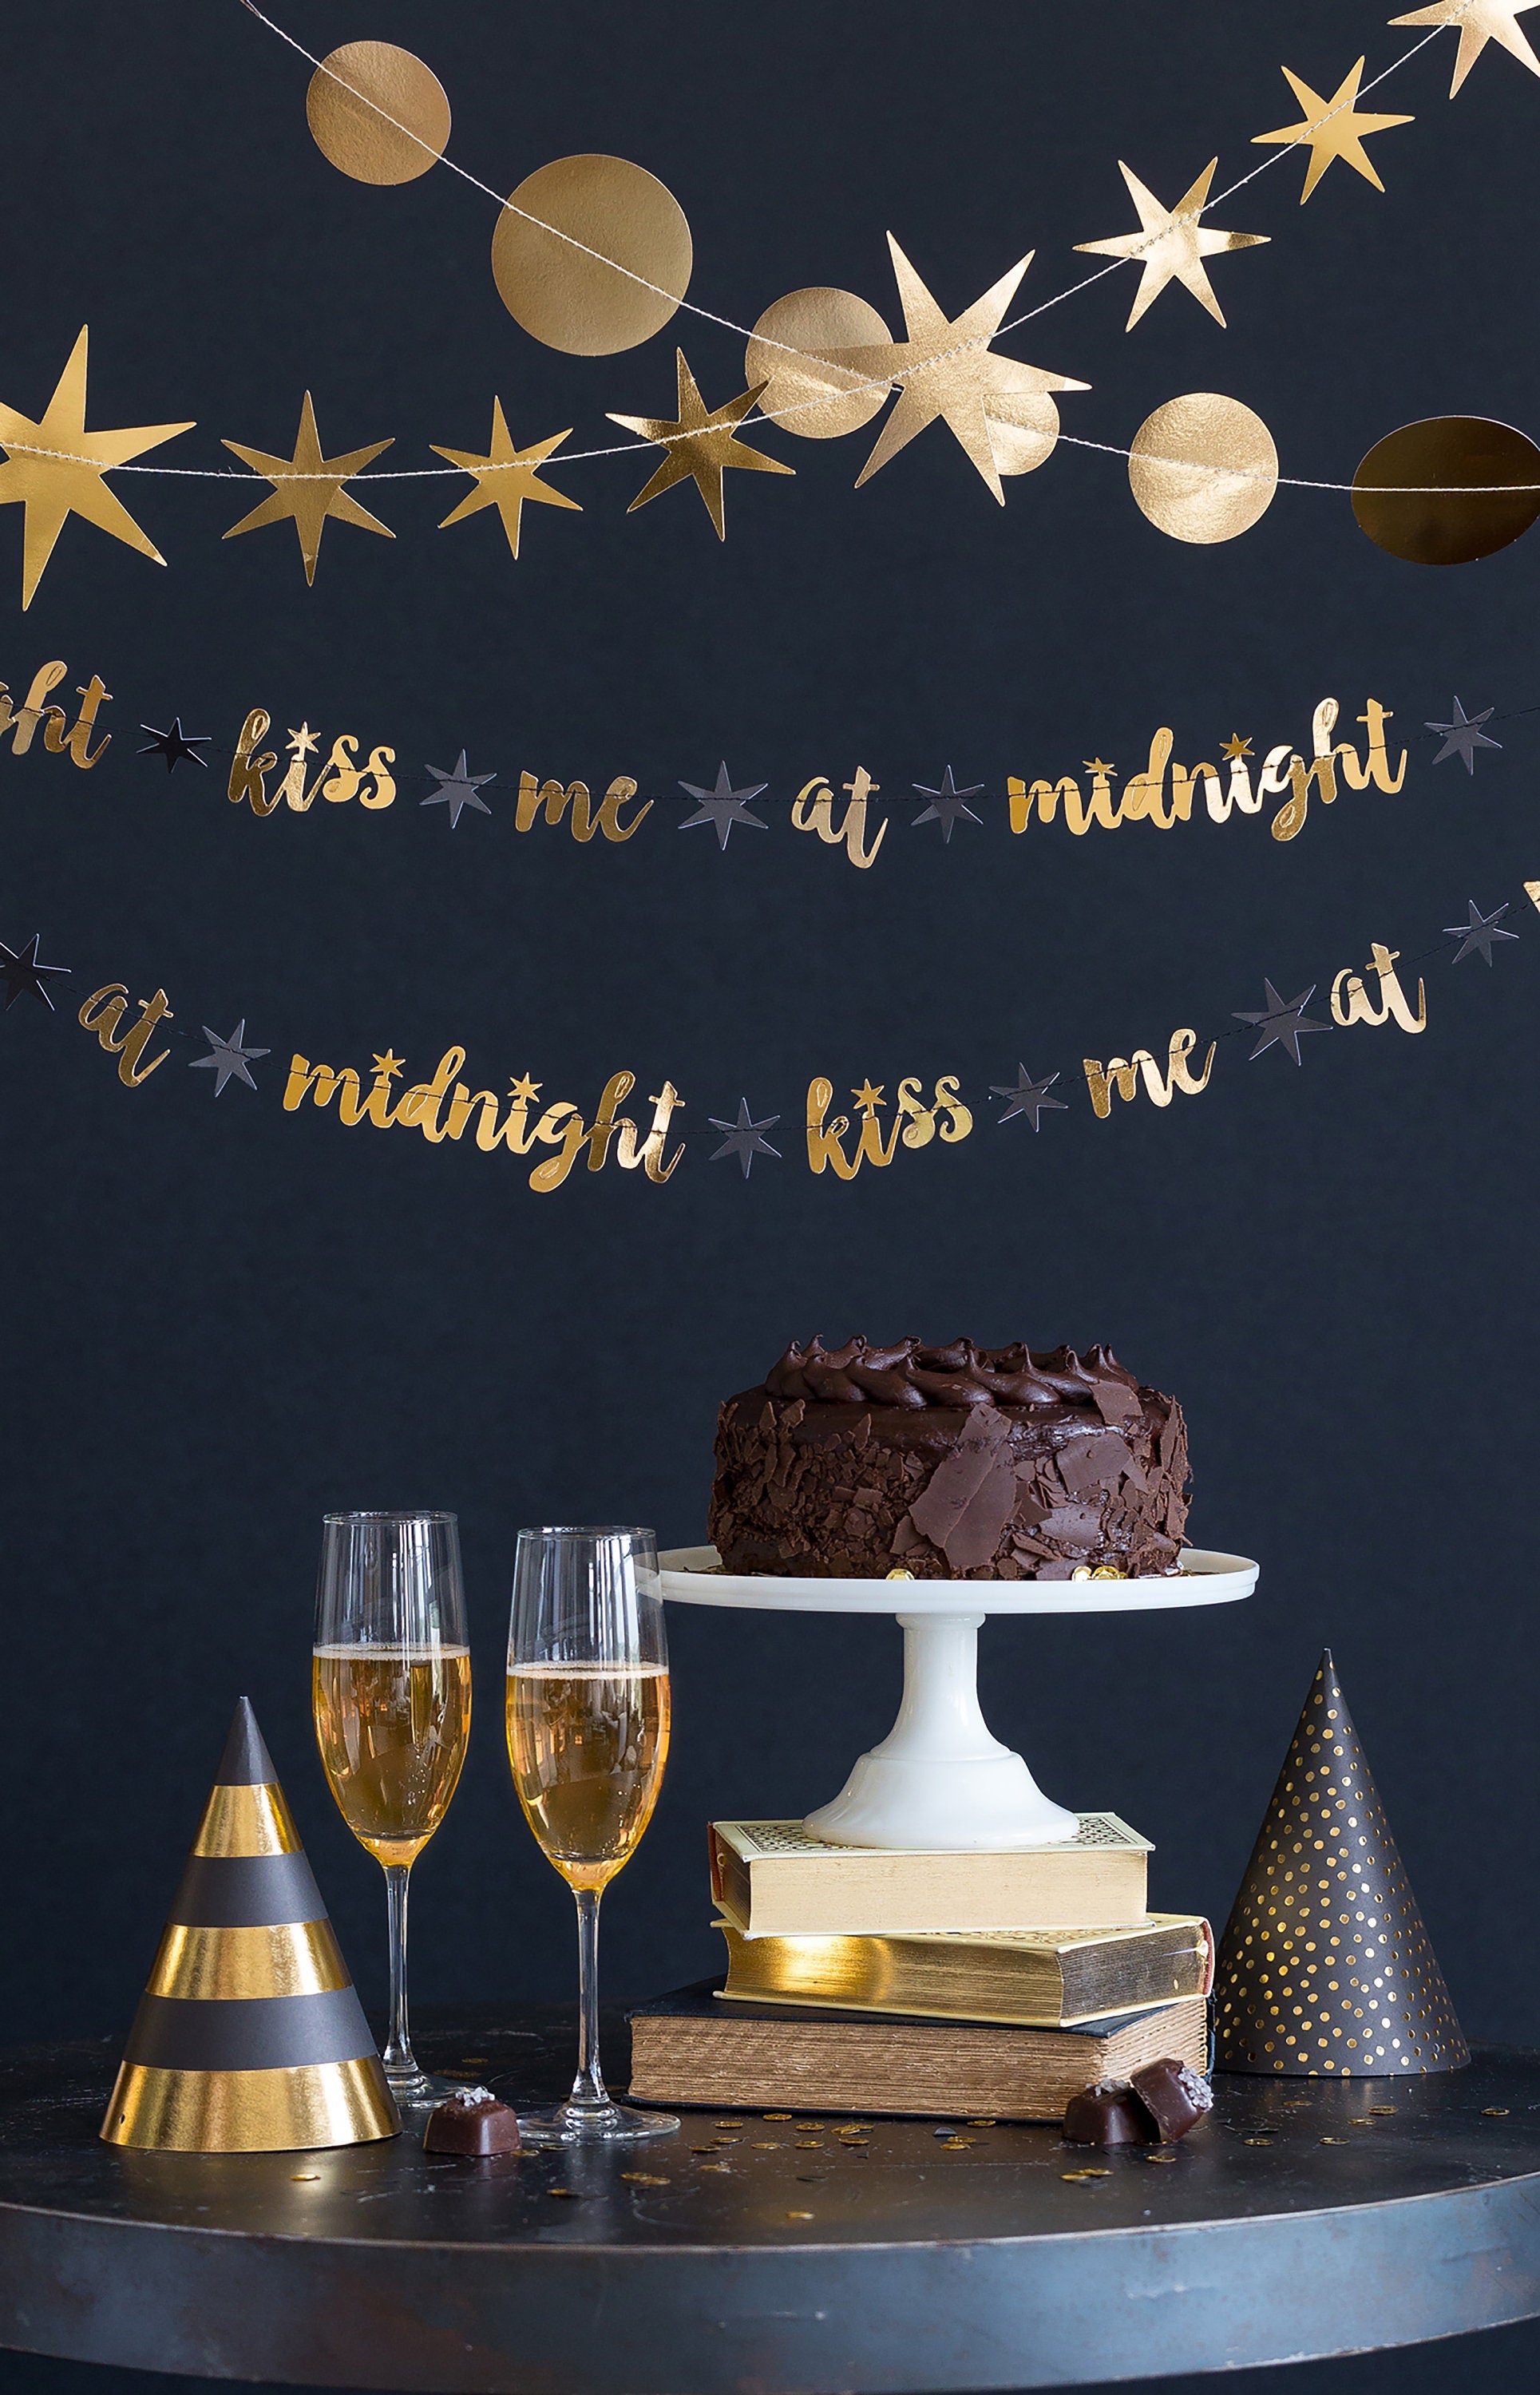 New Year Napkins | New Year's Eve Party Supplies - Gold Napkins - New Year's Toast - Champagne Party - Black & Gold Napkins - New Year Party